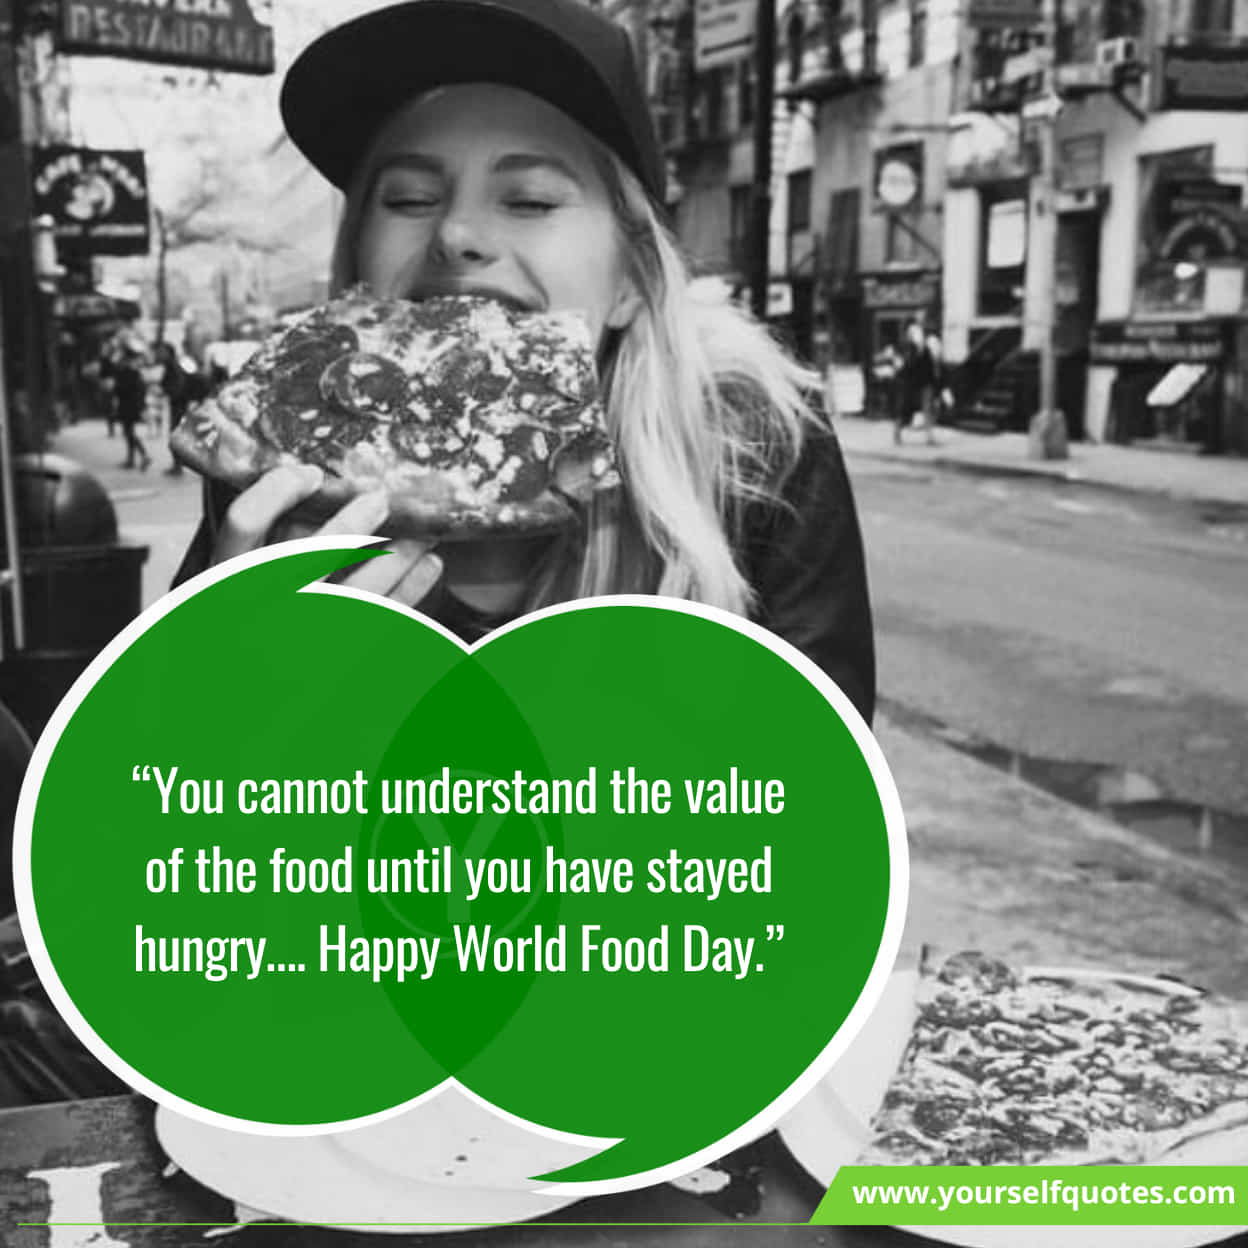 World Food Day Wishes